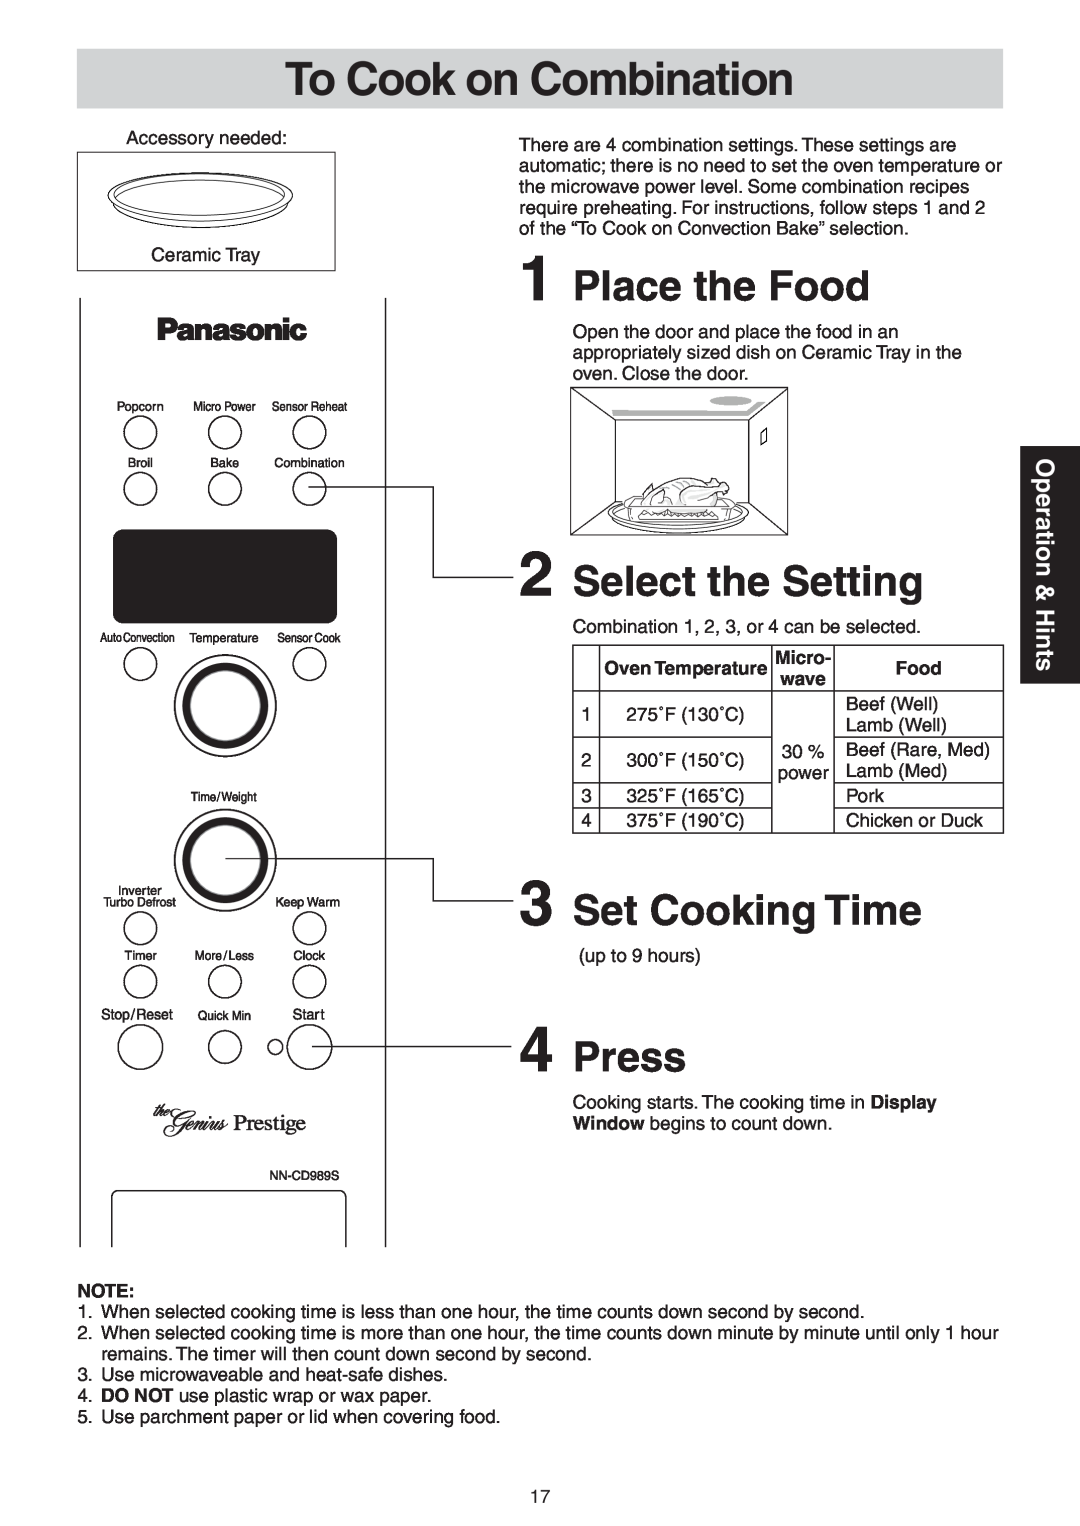 Panasonic NN-CD989S To Cook on Combination, Place the Food, Select the Setting, Set Cooking Time, Press, Operation & Hints 